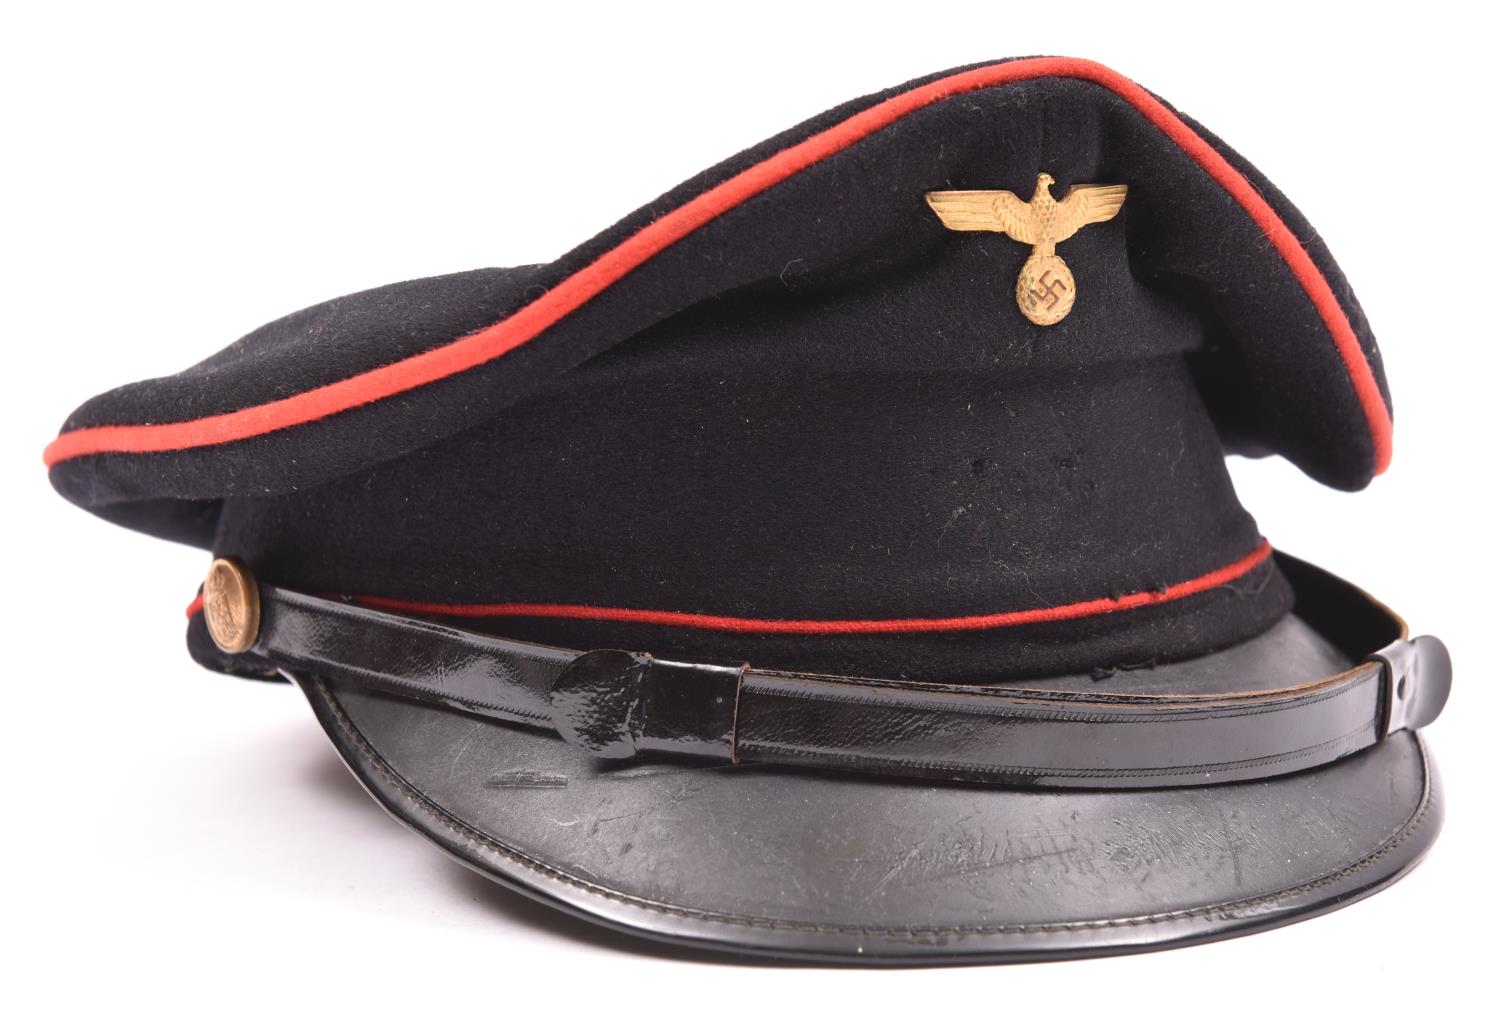 A Third Reich period peaked cap, believed to be to the NSB (Dutch Nazi Party), black with red